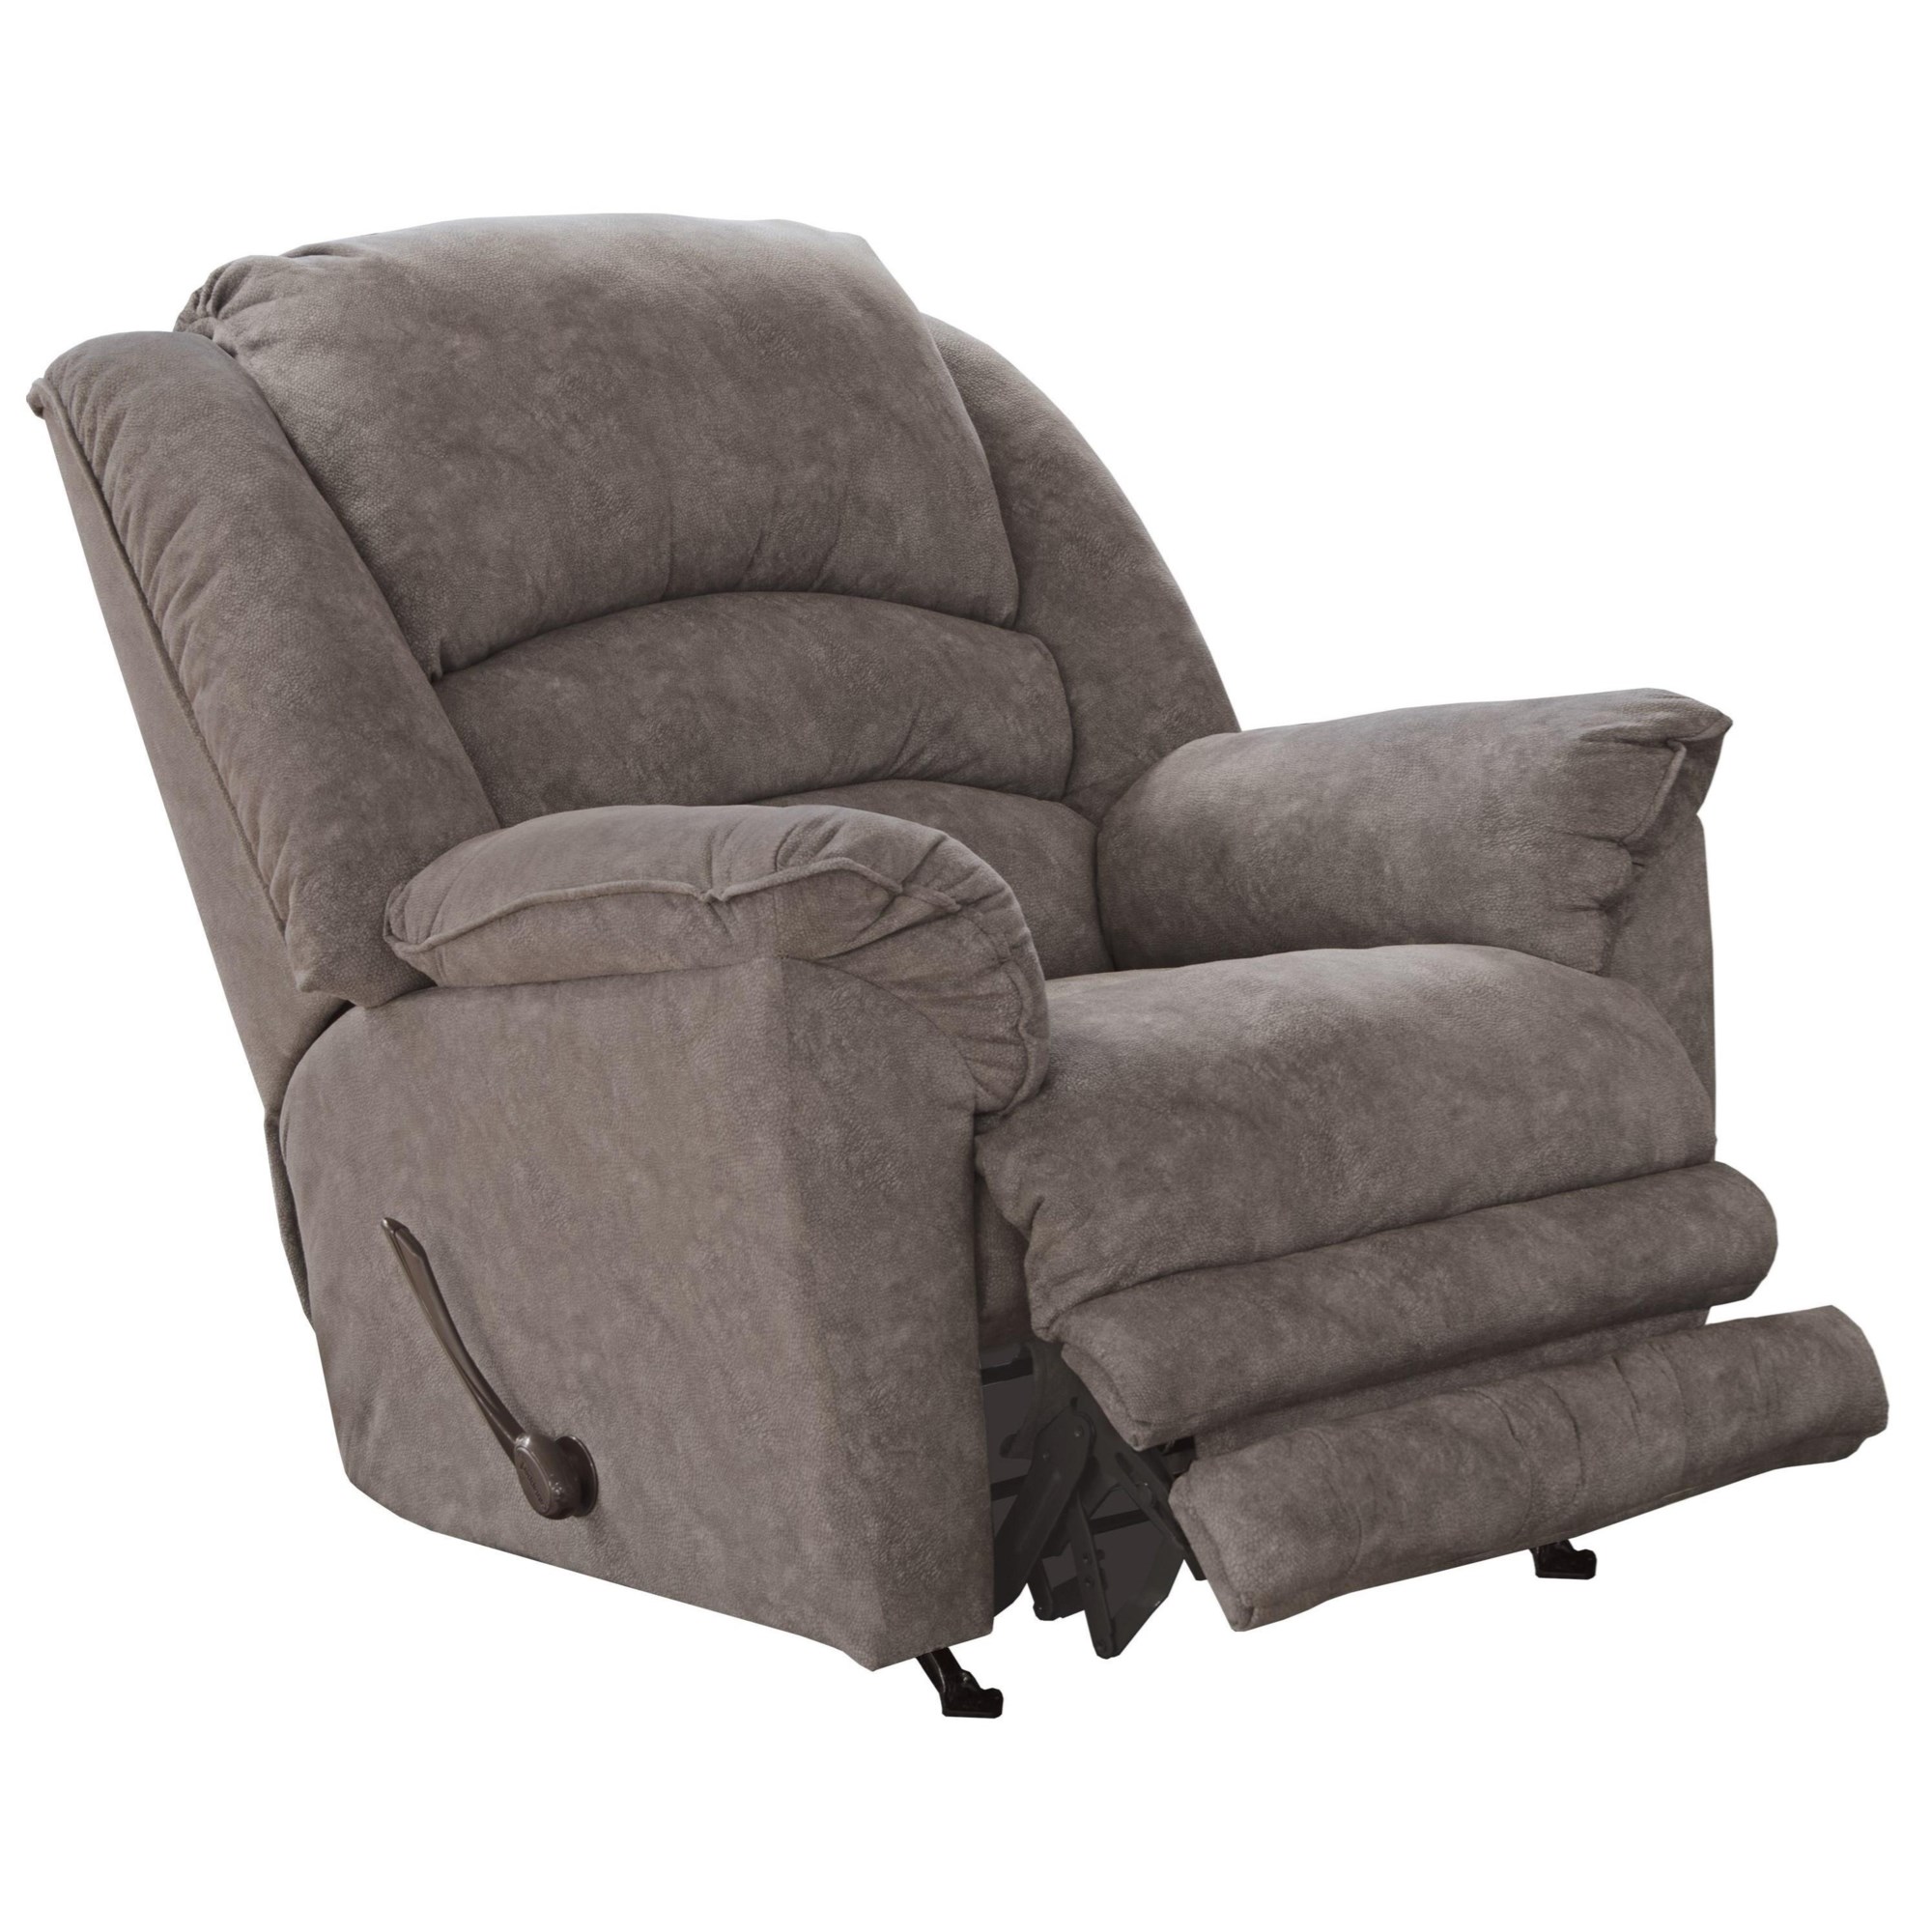 Catnapper 4775 Rialto 4775-2-1628-38 Casual Lay Flat Rocker Recliner with  Extended Footrest, Wayside Furniture & Mattress